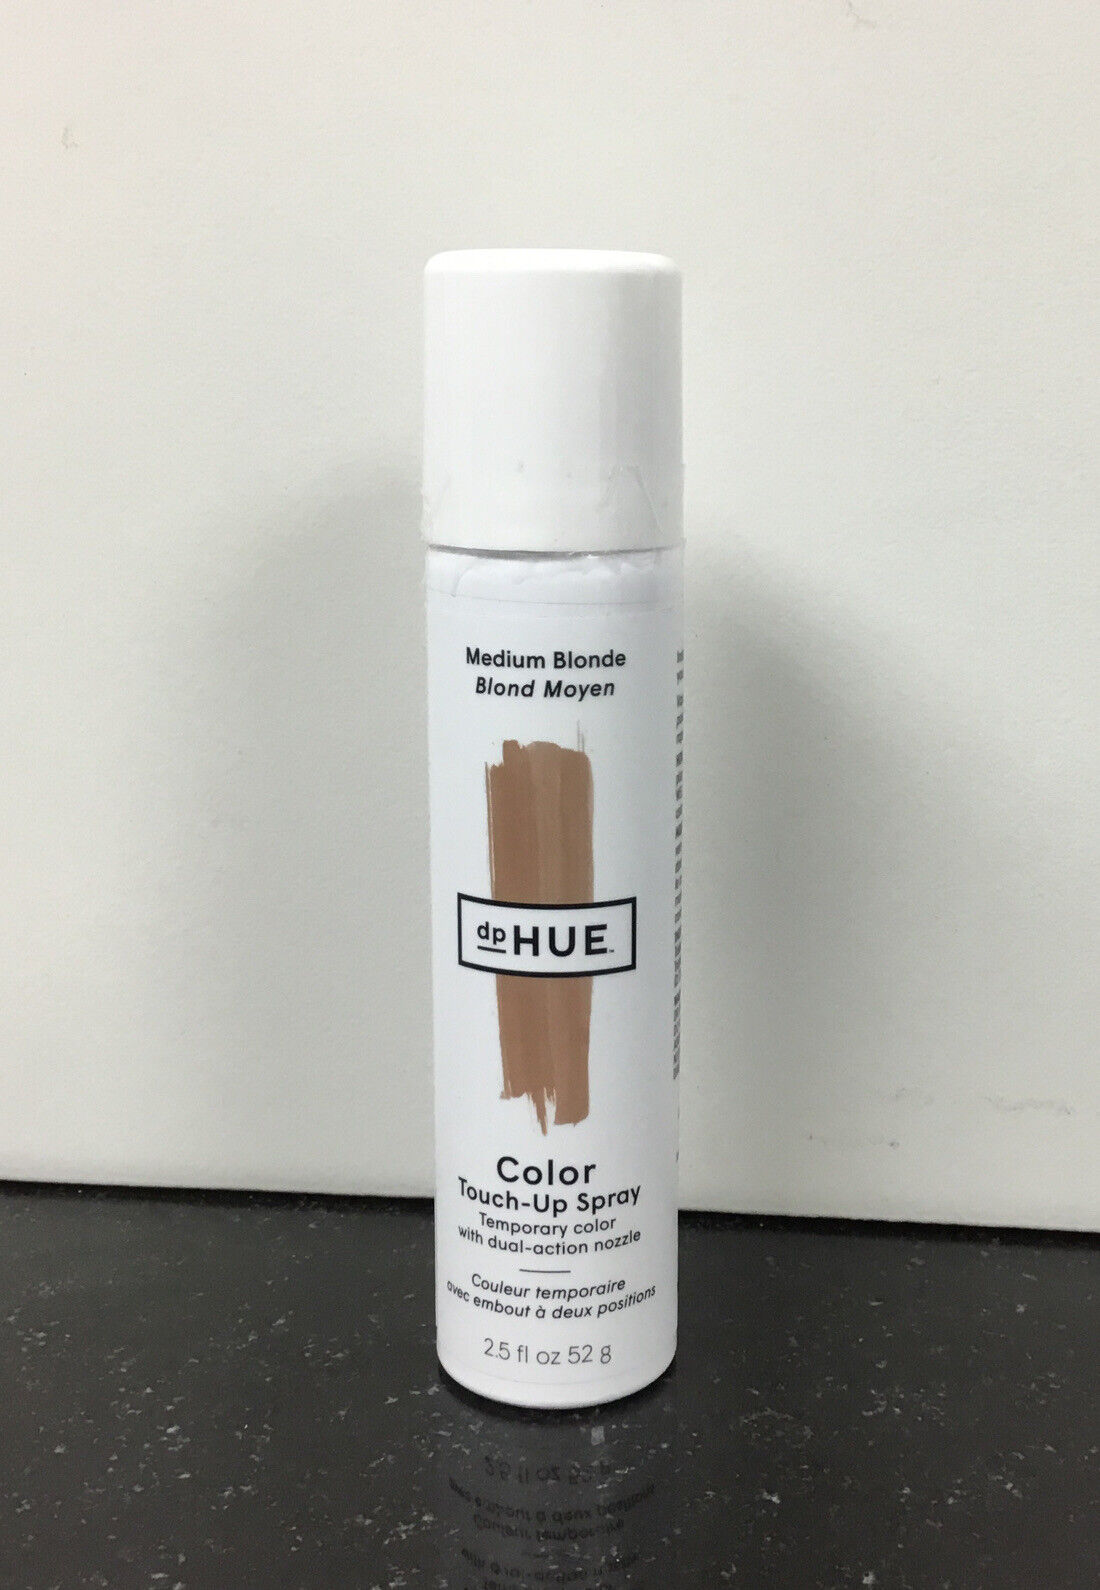 dpHUE Color Touch-Up Spray medium blonde  2.5 oz NEW